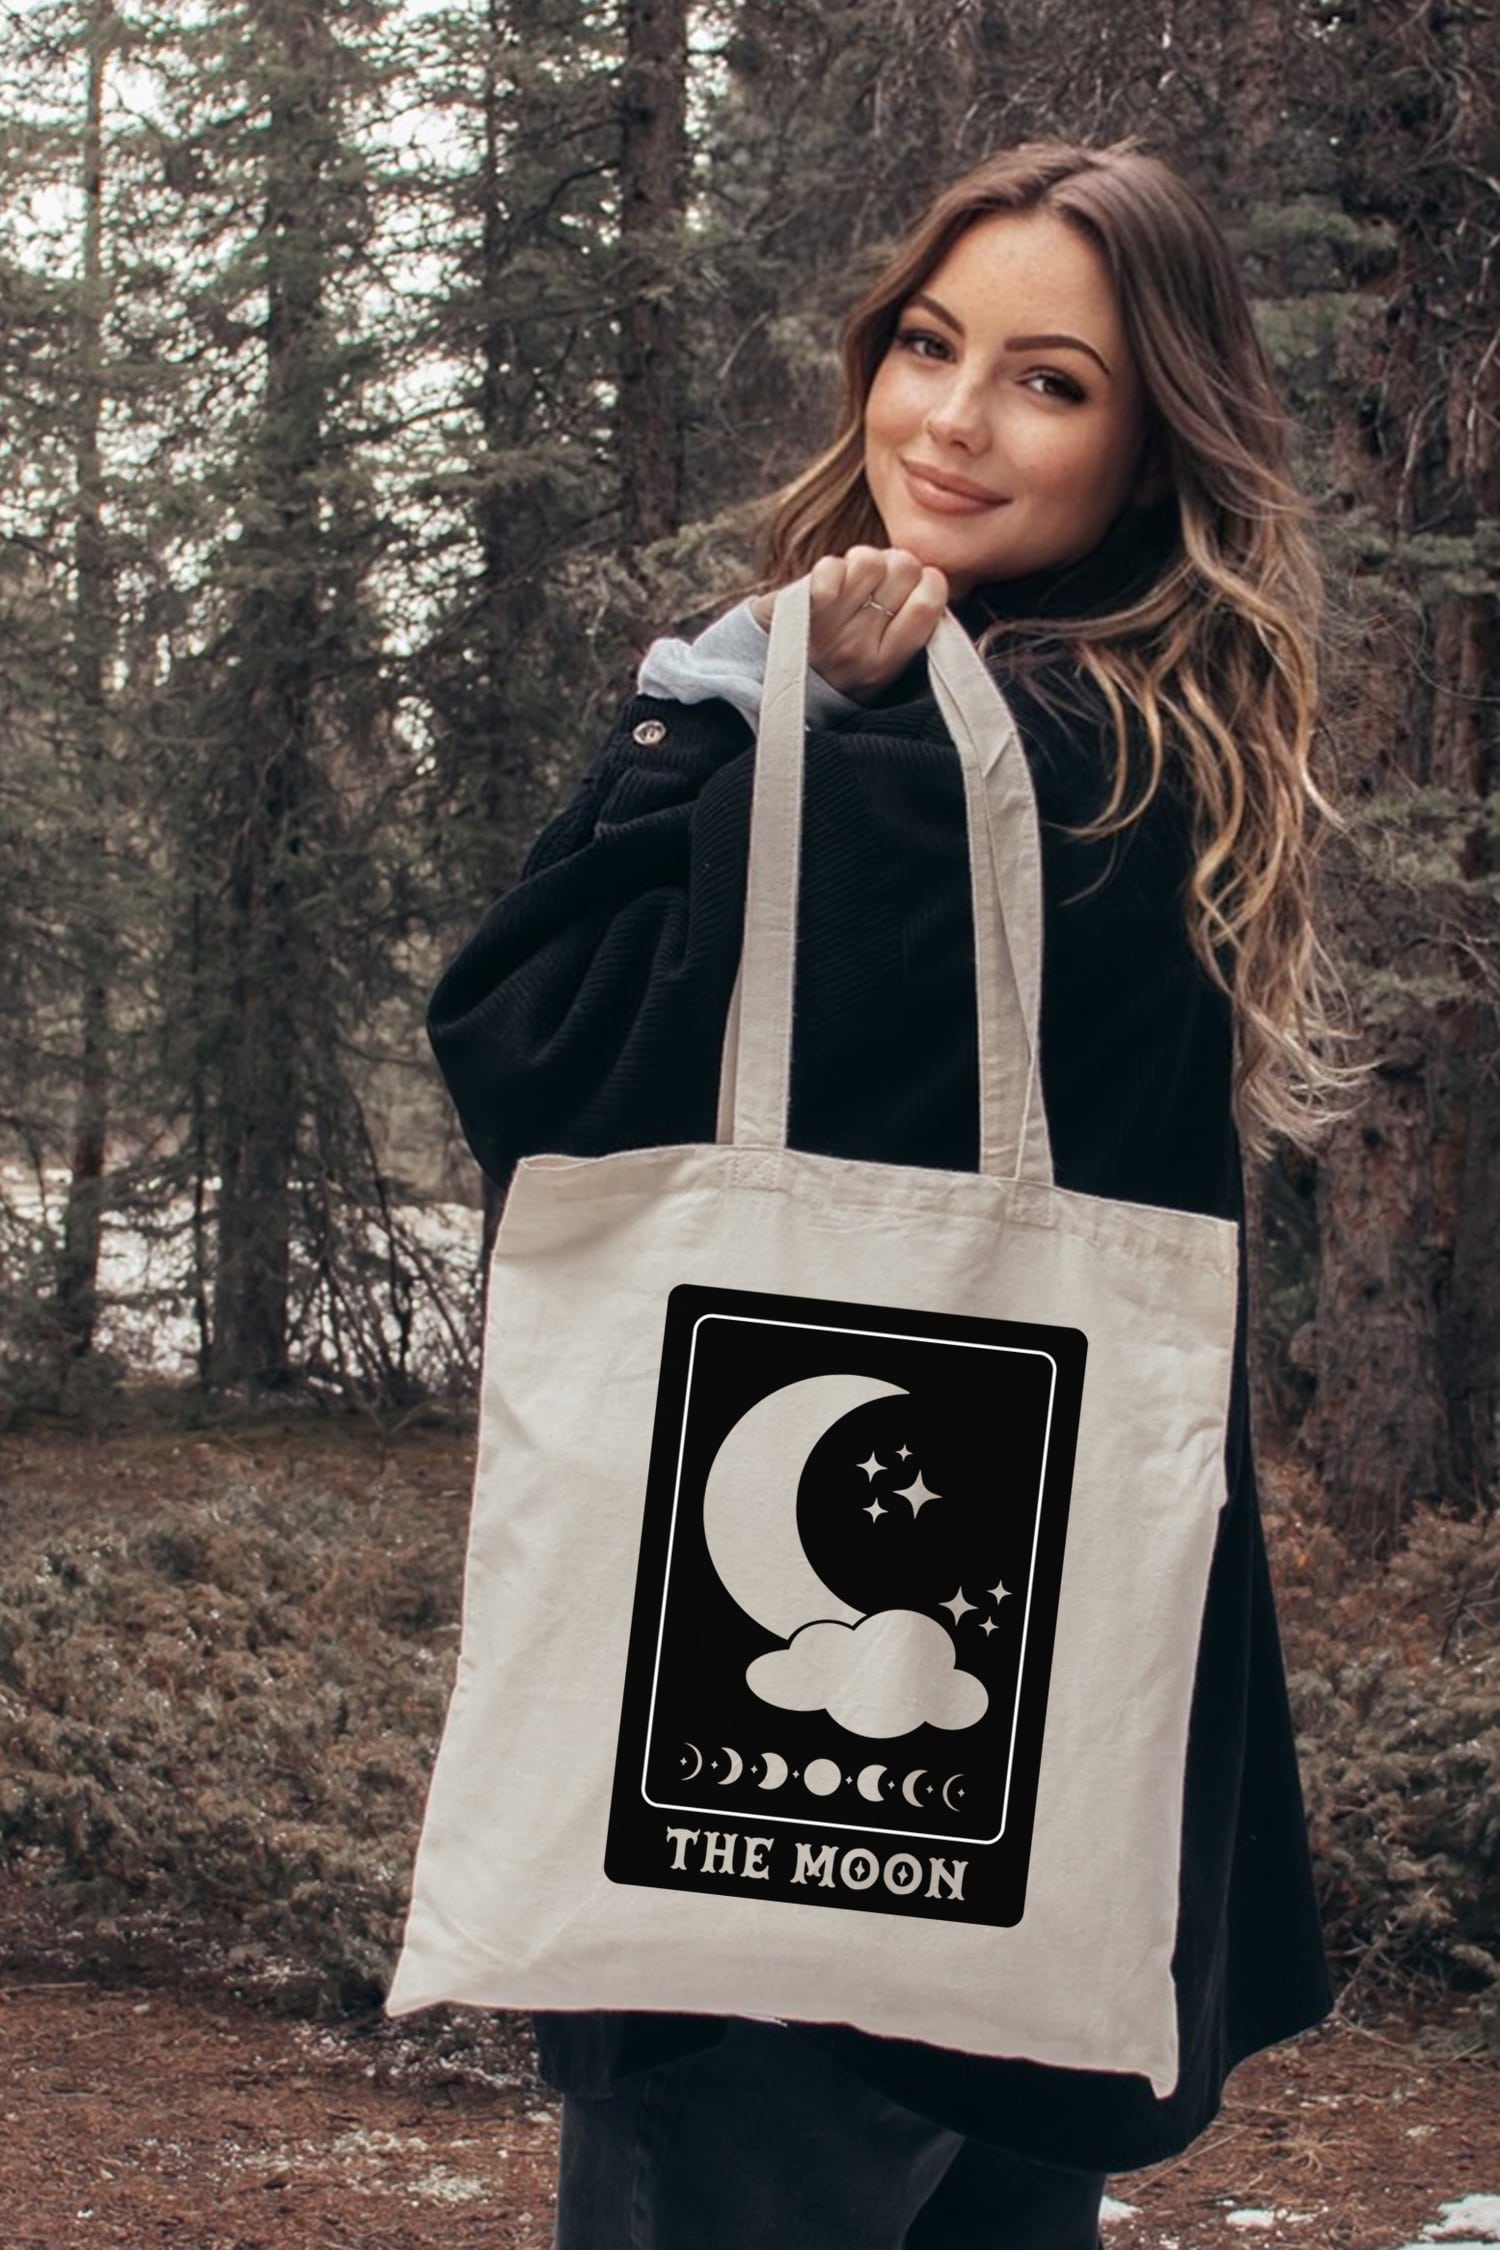 moon tarot card svg file on canvas tote carried by woman in woods